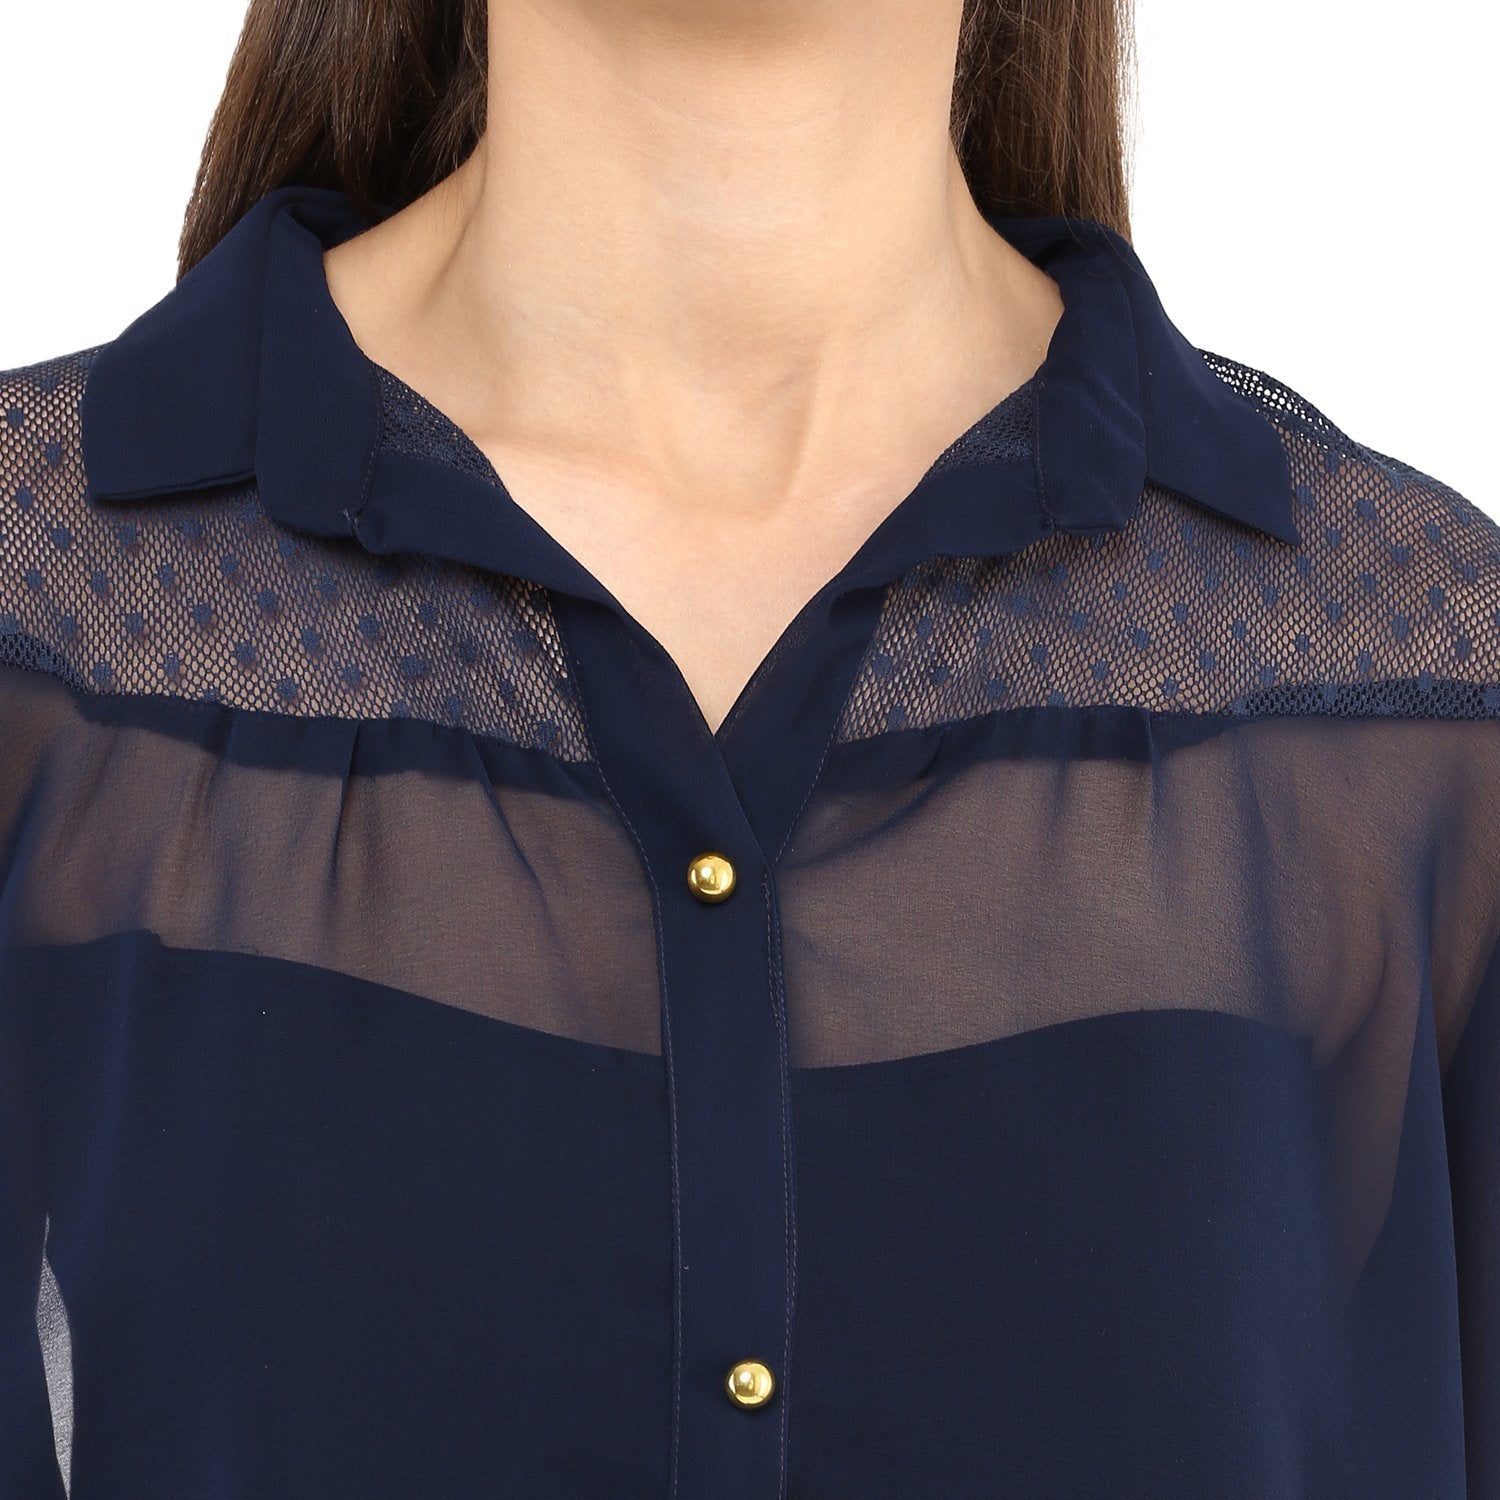 Women's Dotted Hippy Top - Pannkh